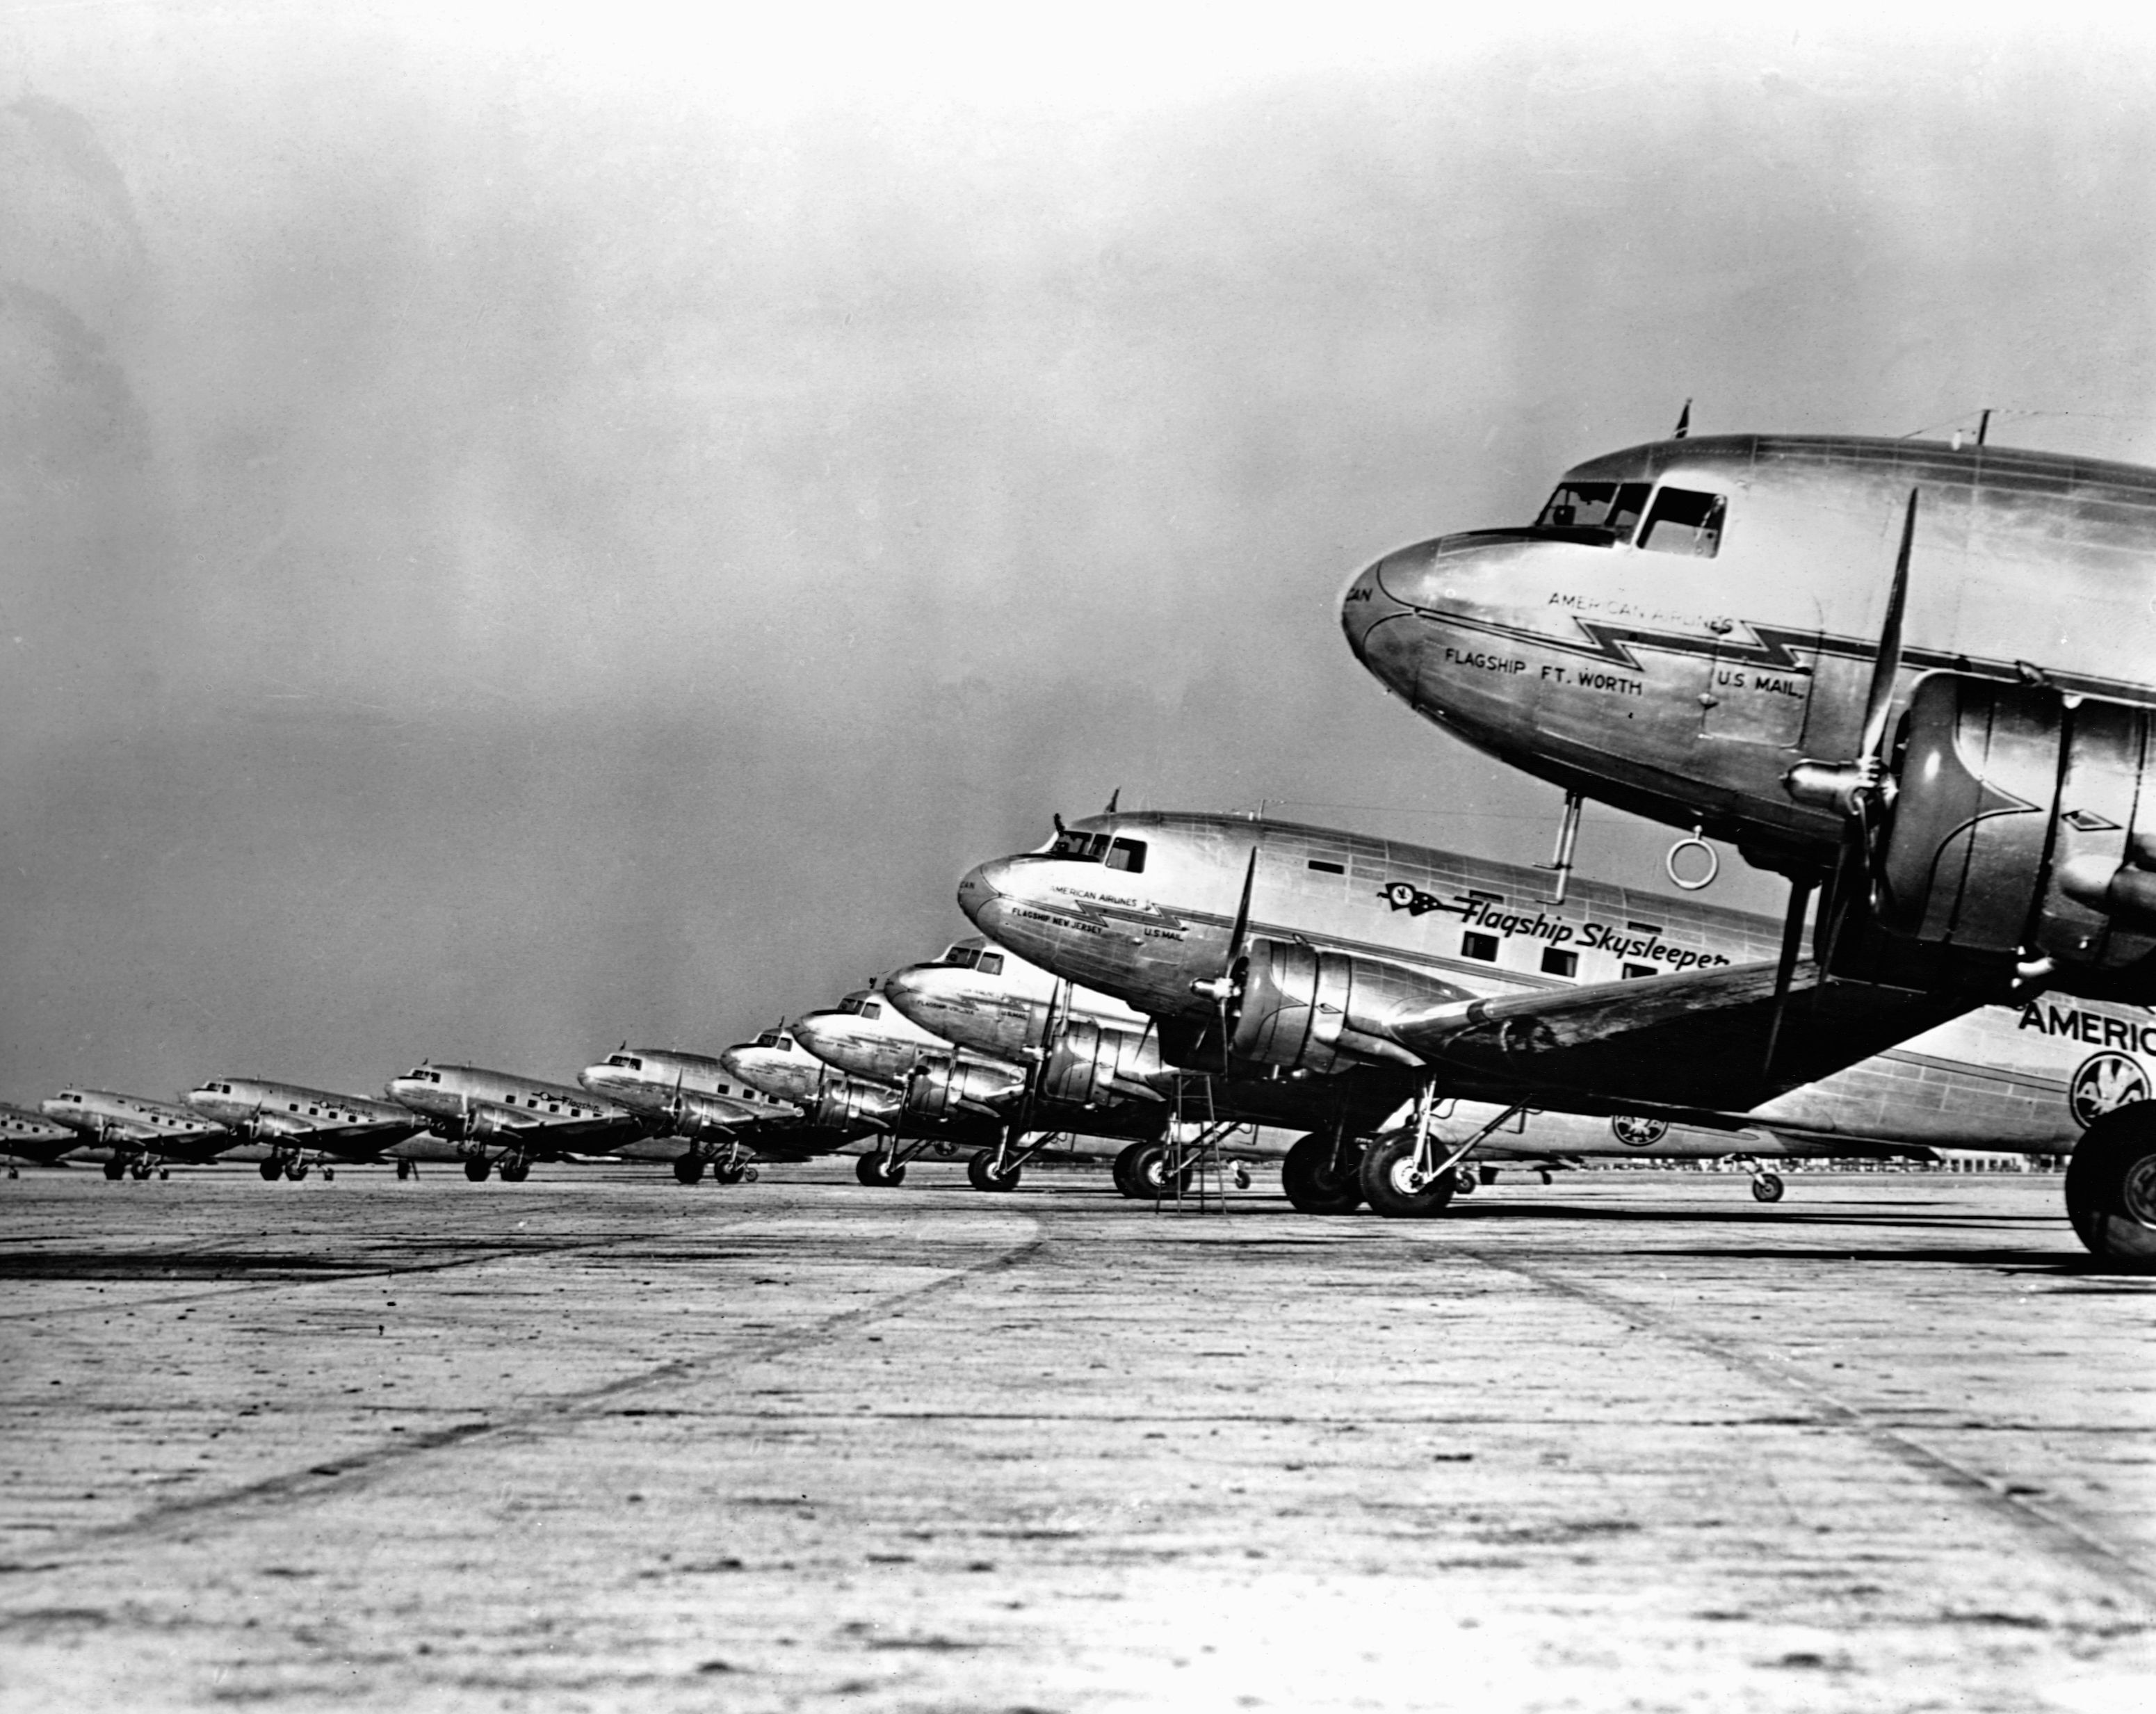 DC-3s lines up